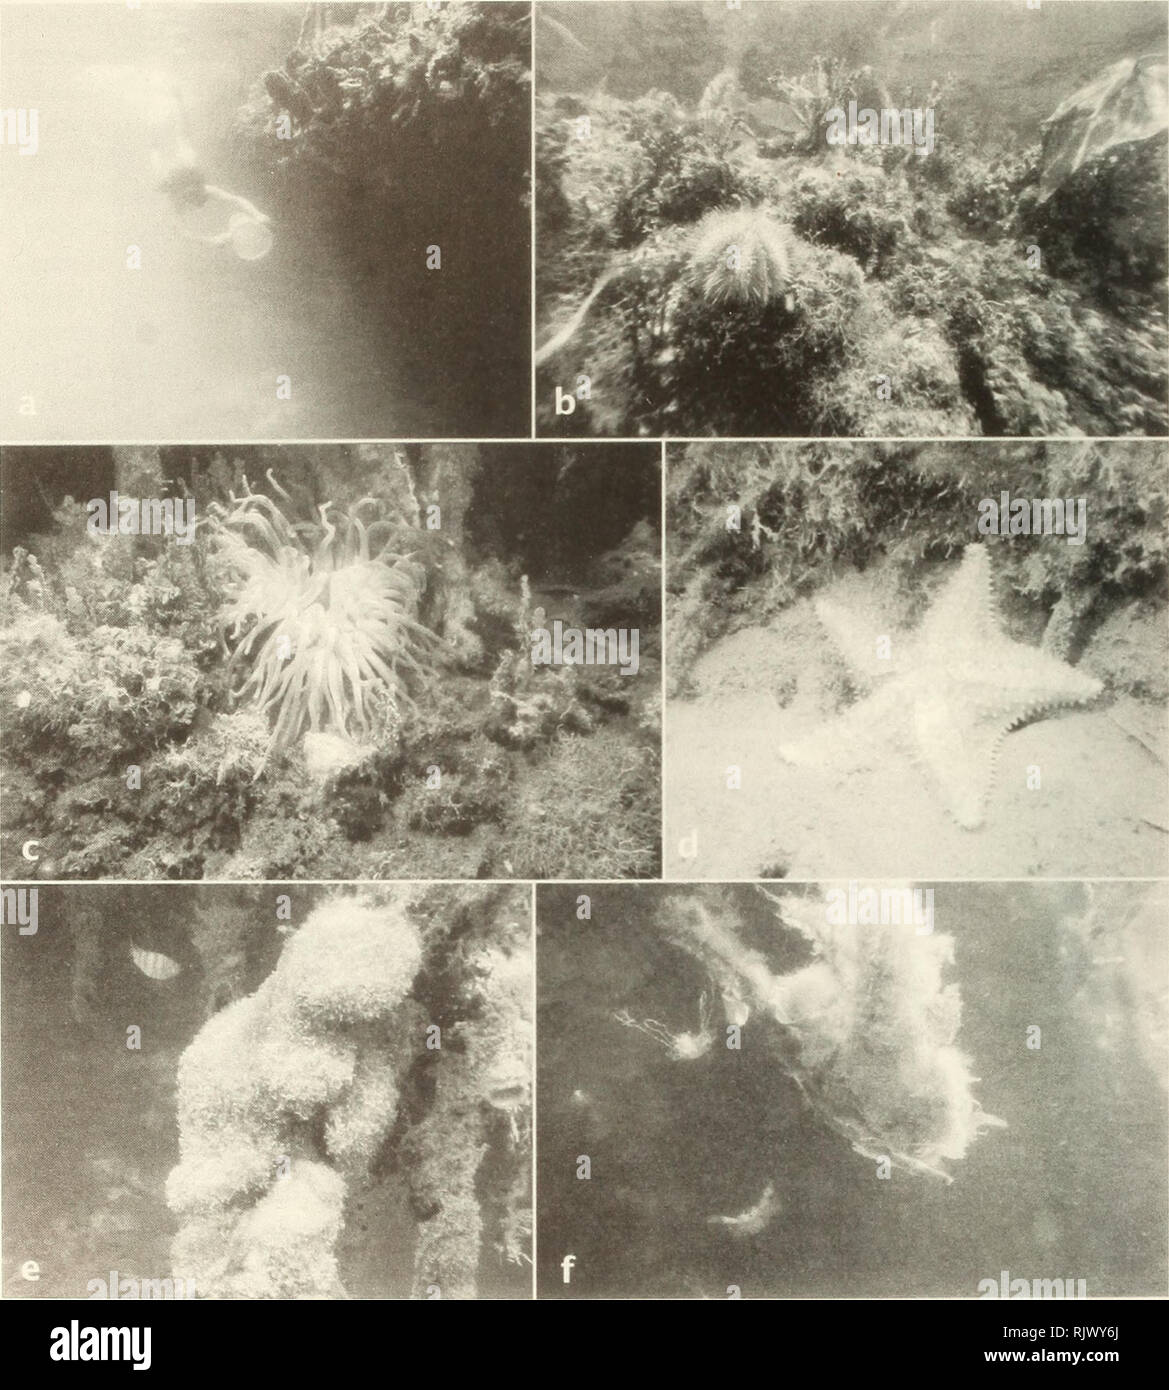 . Atoll research bulletin. Coral reefs and islands; Marine biology; Marine sciences. Figure 4. Underwater views of habitats of Batfish Point-'Cuda Cut: a, diver pushing plankton net along peat-bank undercut; b, peat bank shoulder covered by Halimeda algae, with sea urchin (Lytechinus) in foreground (photo, C. Clark); c, peat bank wall with Halimeda and sea anemone, Condylactis; d, starfish Oreaster at base of peat bank; e, mangrove (Rhizophora) root covered by filamentous cyanobacteria (Lyngbya);/, detached cyanobacteria forming floats, lifted to the surface by trapped photosynthetic air bubbl Stock Photo